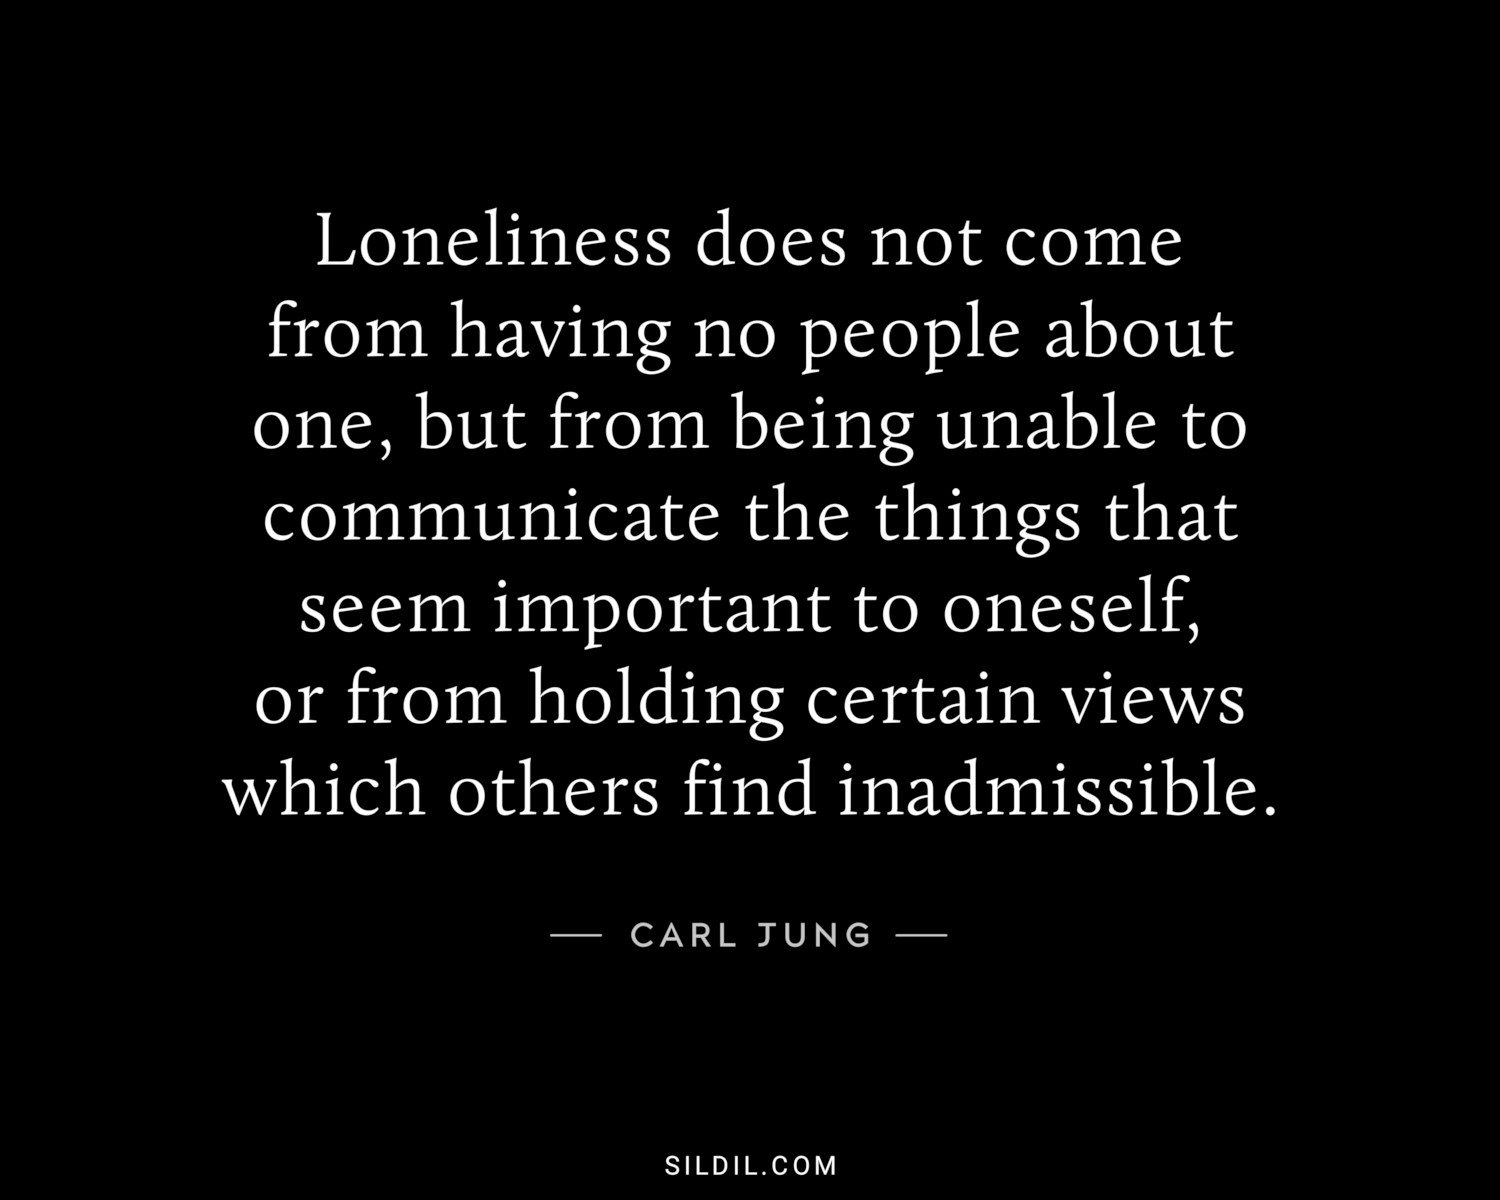 Loneliness does not come from having no people about one, but from being unable to communicate the things that seem important to oneself, or from holding certain views which others find inadmissible.